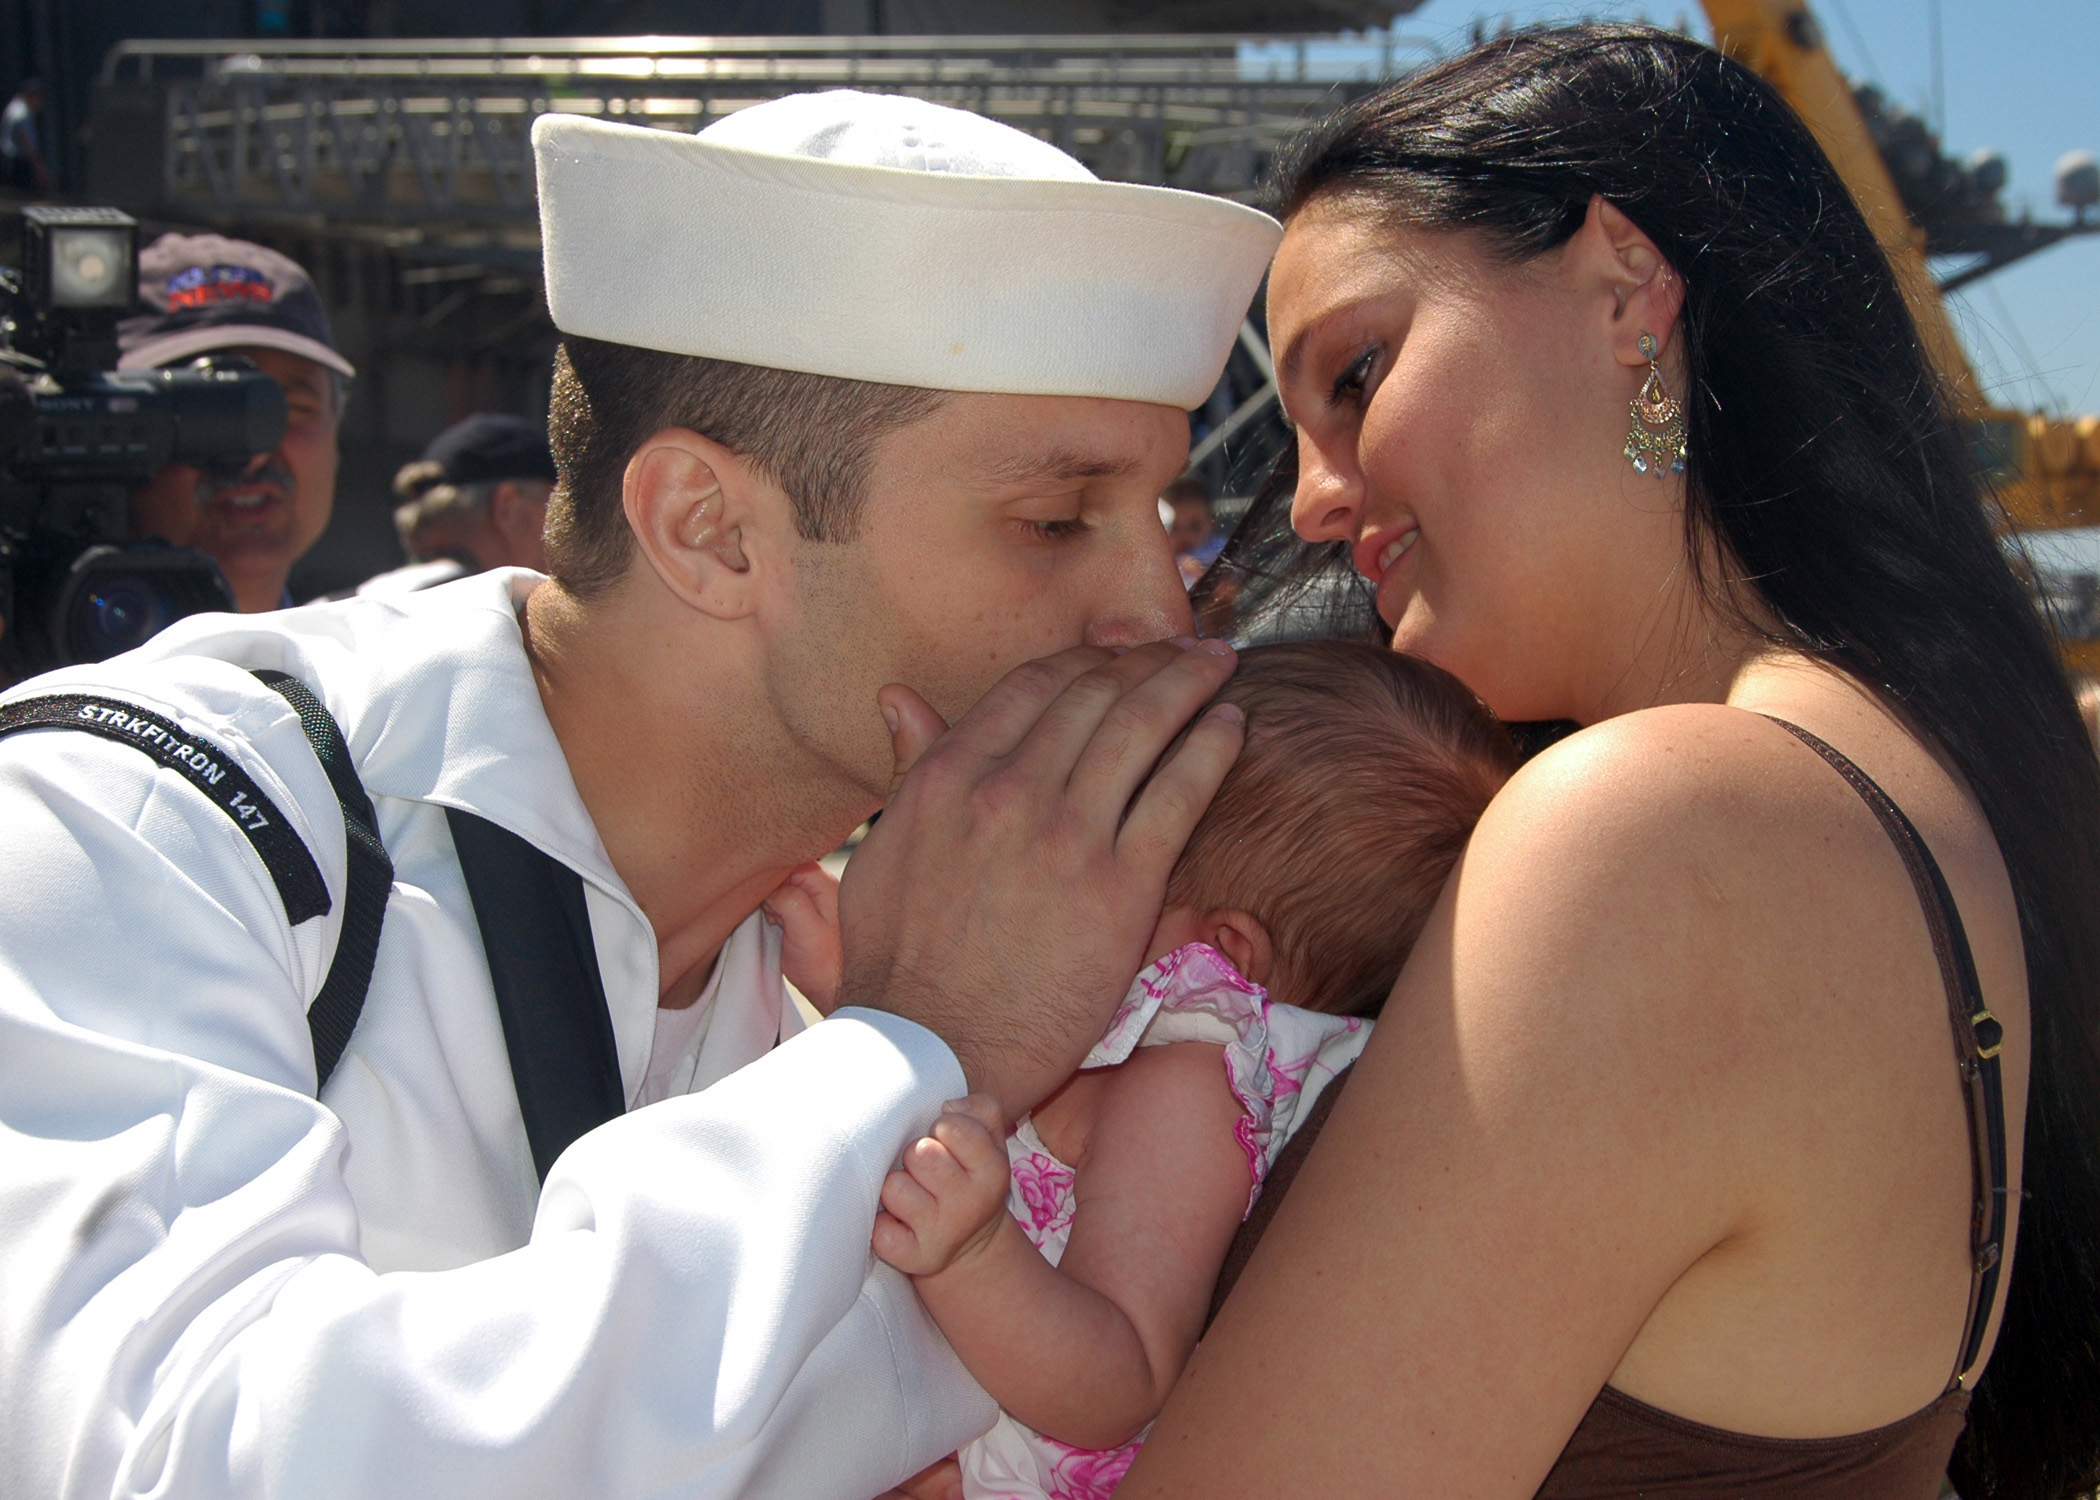 US Navy 070827-N-4007G-004 A Sailor greets his newborn child for the first time at Naval Air Station North Island after concluding a 7.5-month deployment aboard USS John C. Stennis (CVN 74)